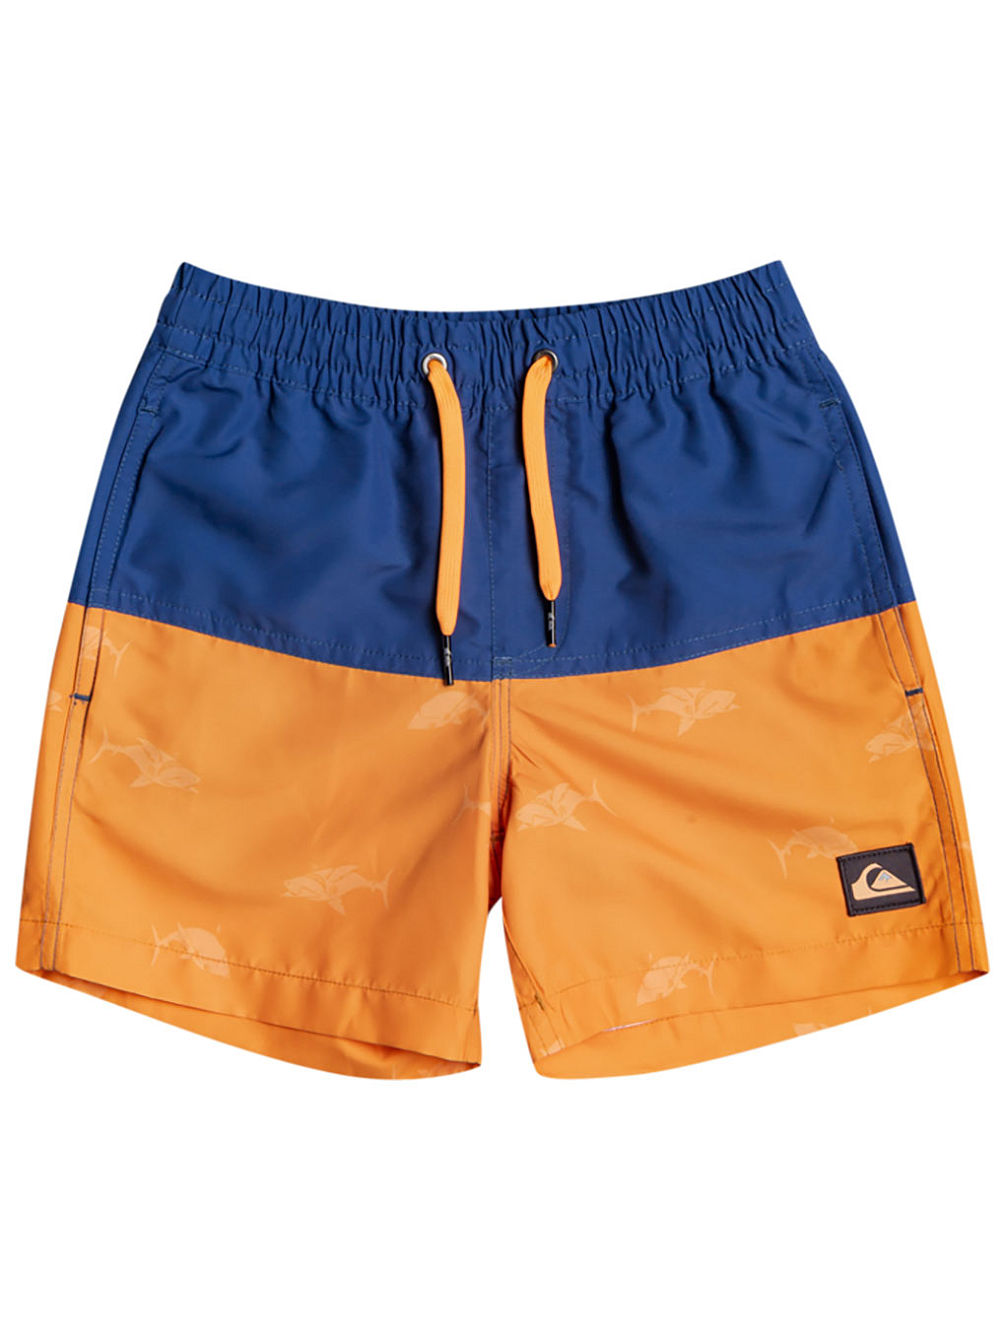 Quiksilver Boys Everyday More Core Youth 17 Boardshort Swim Trunk